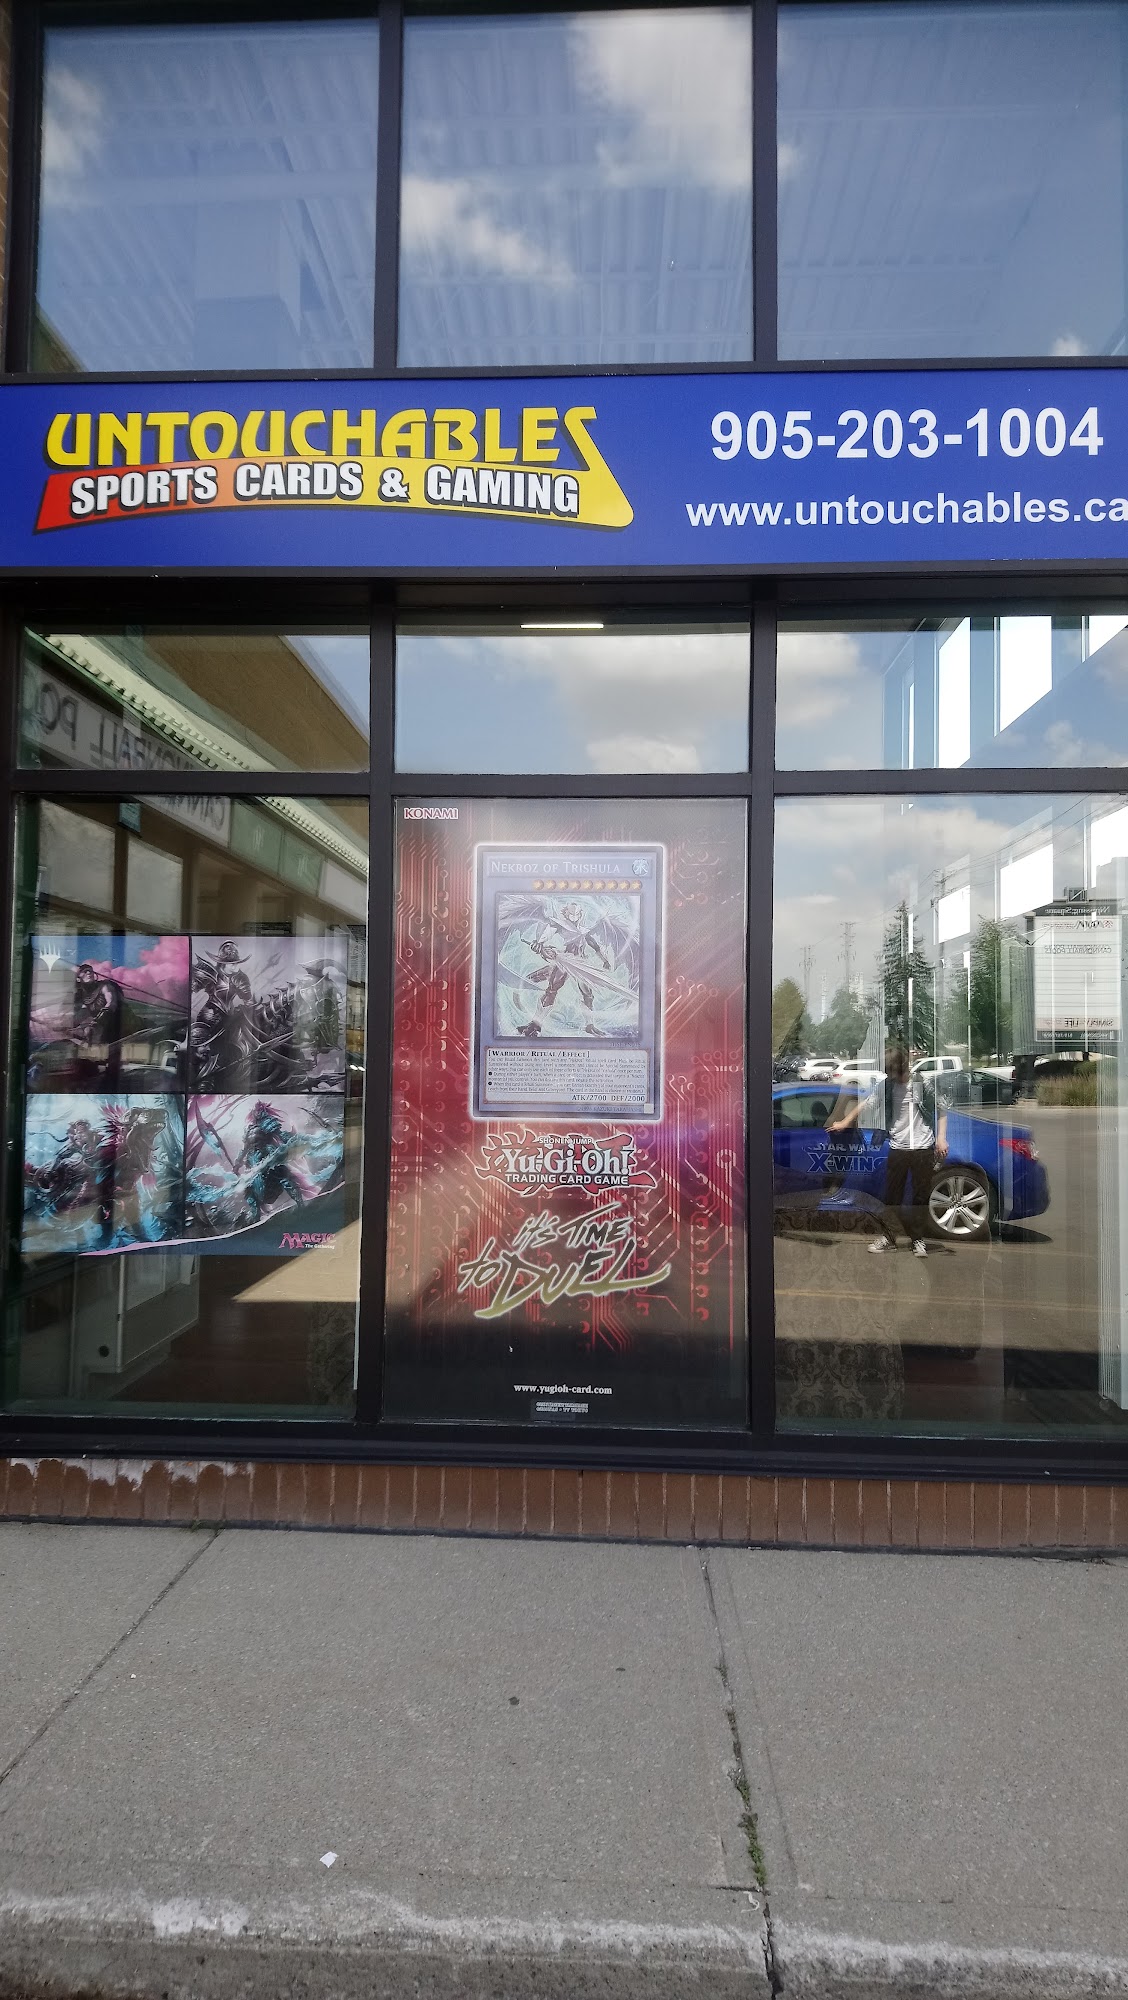 Untouchables Sports Cards & Gaming - Milton